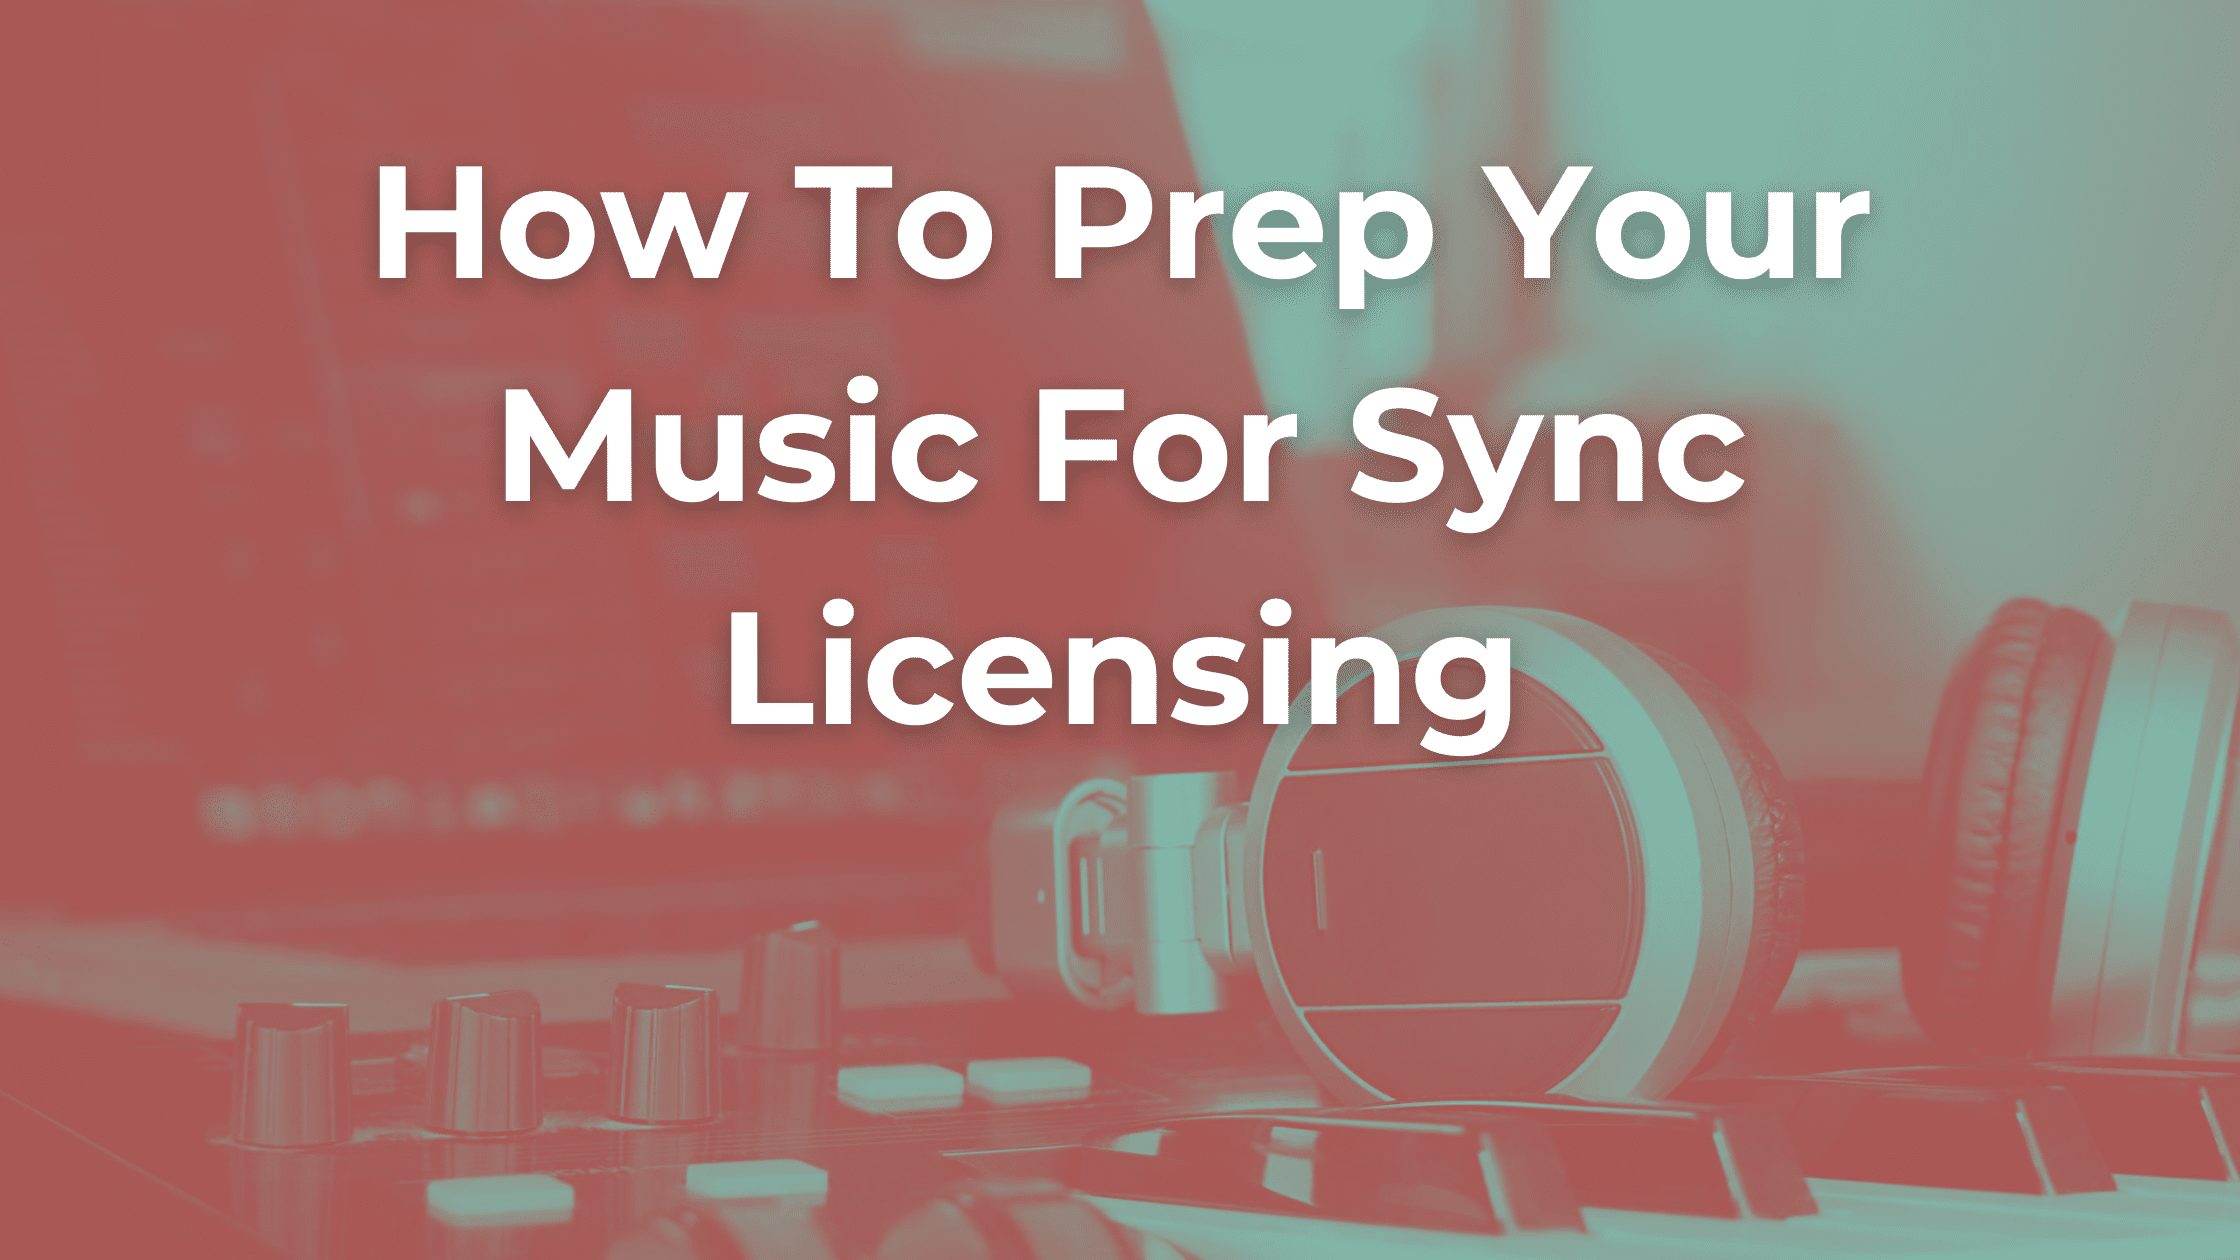 How To Prep Your Music For Sync Licensing